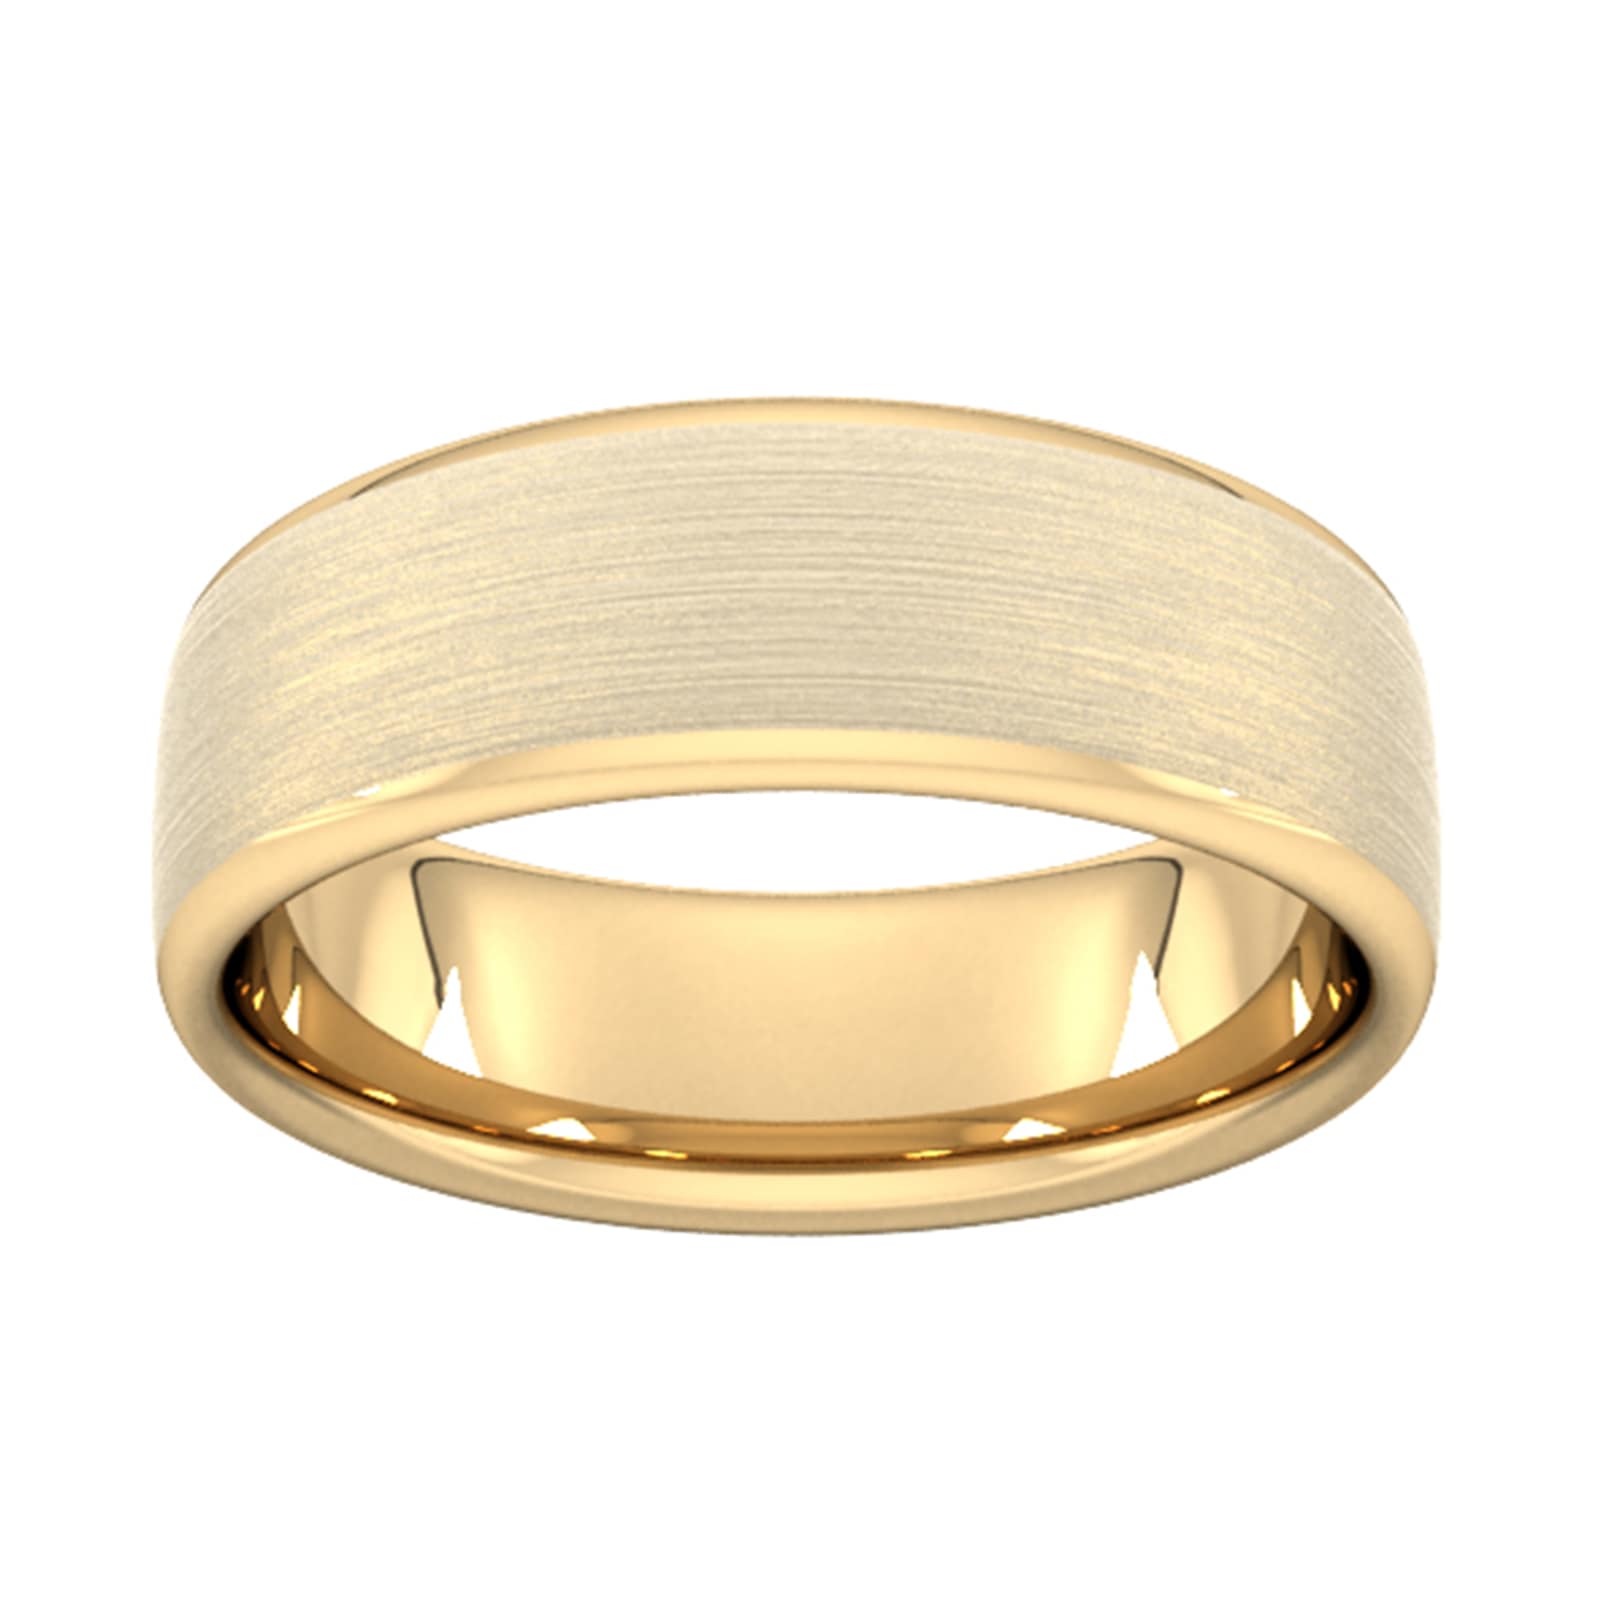 7mm D Shape Heavy Matt Finished Wedding Ring In 9 Carat Yellow Gold - Ring Size M